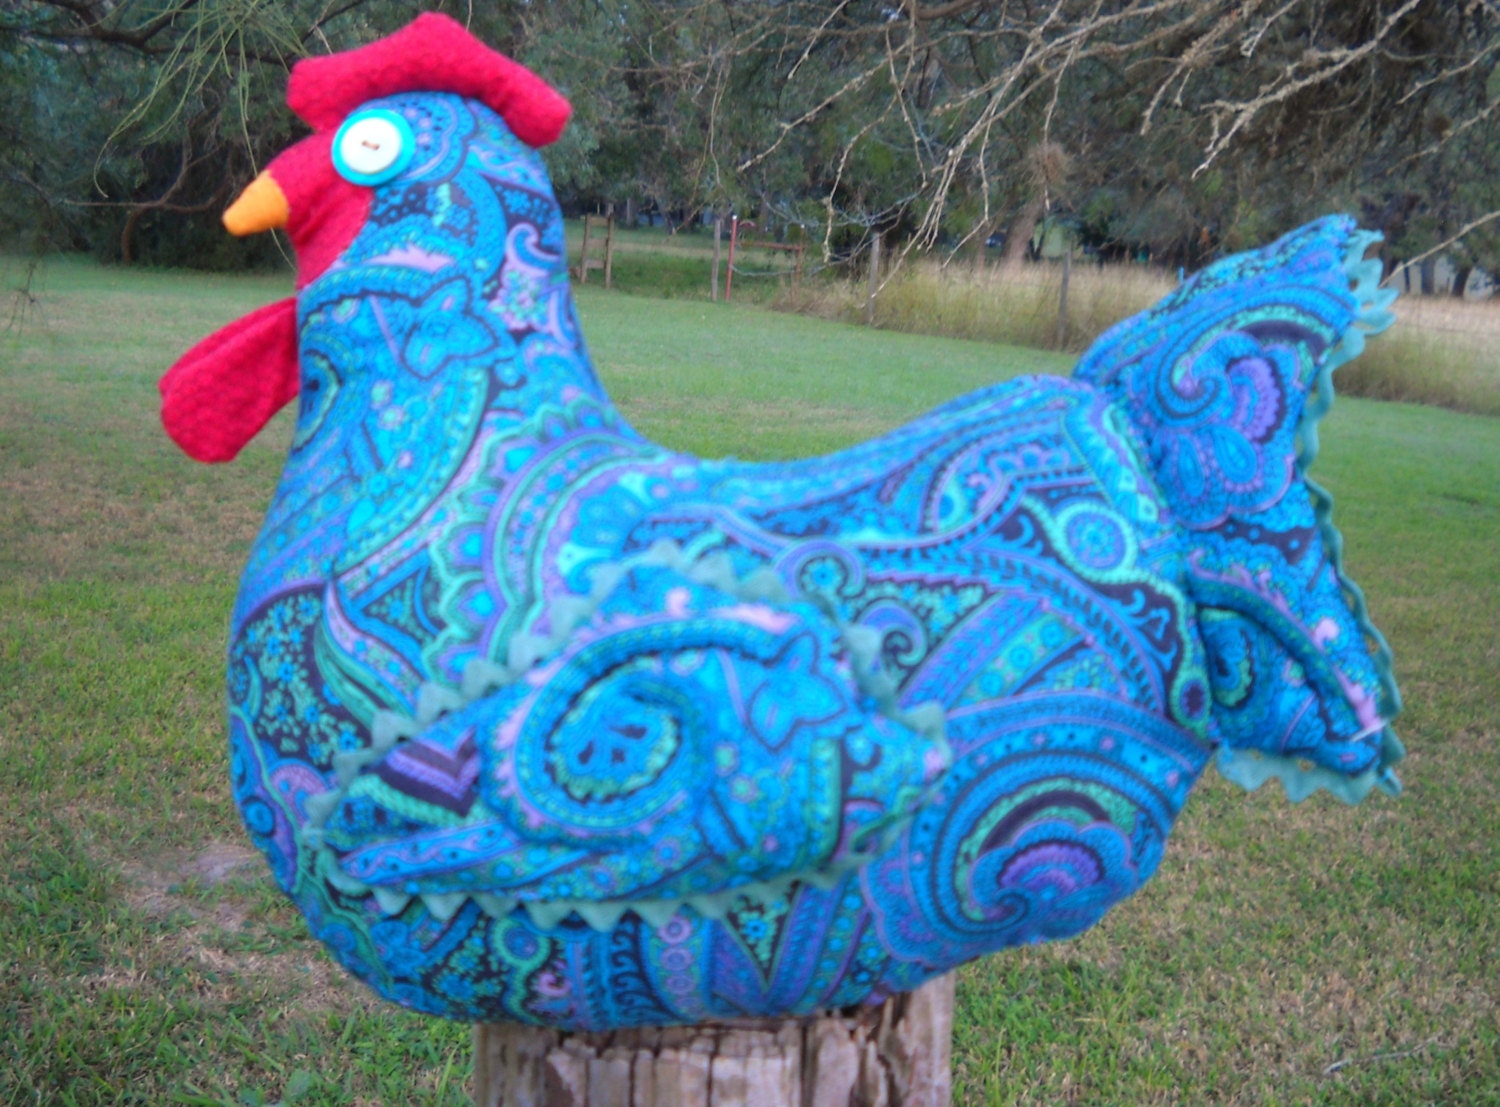 Blue paisley fabric chicken doorstop - Japanese print fabric, quilted wings & tail, sea green rickrack trim - ChickenJungle